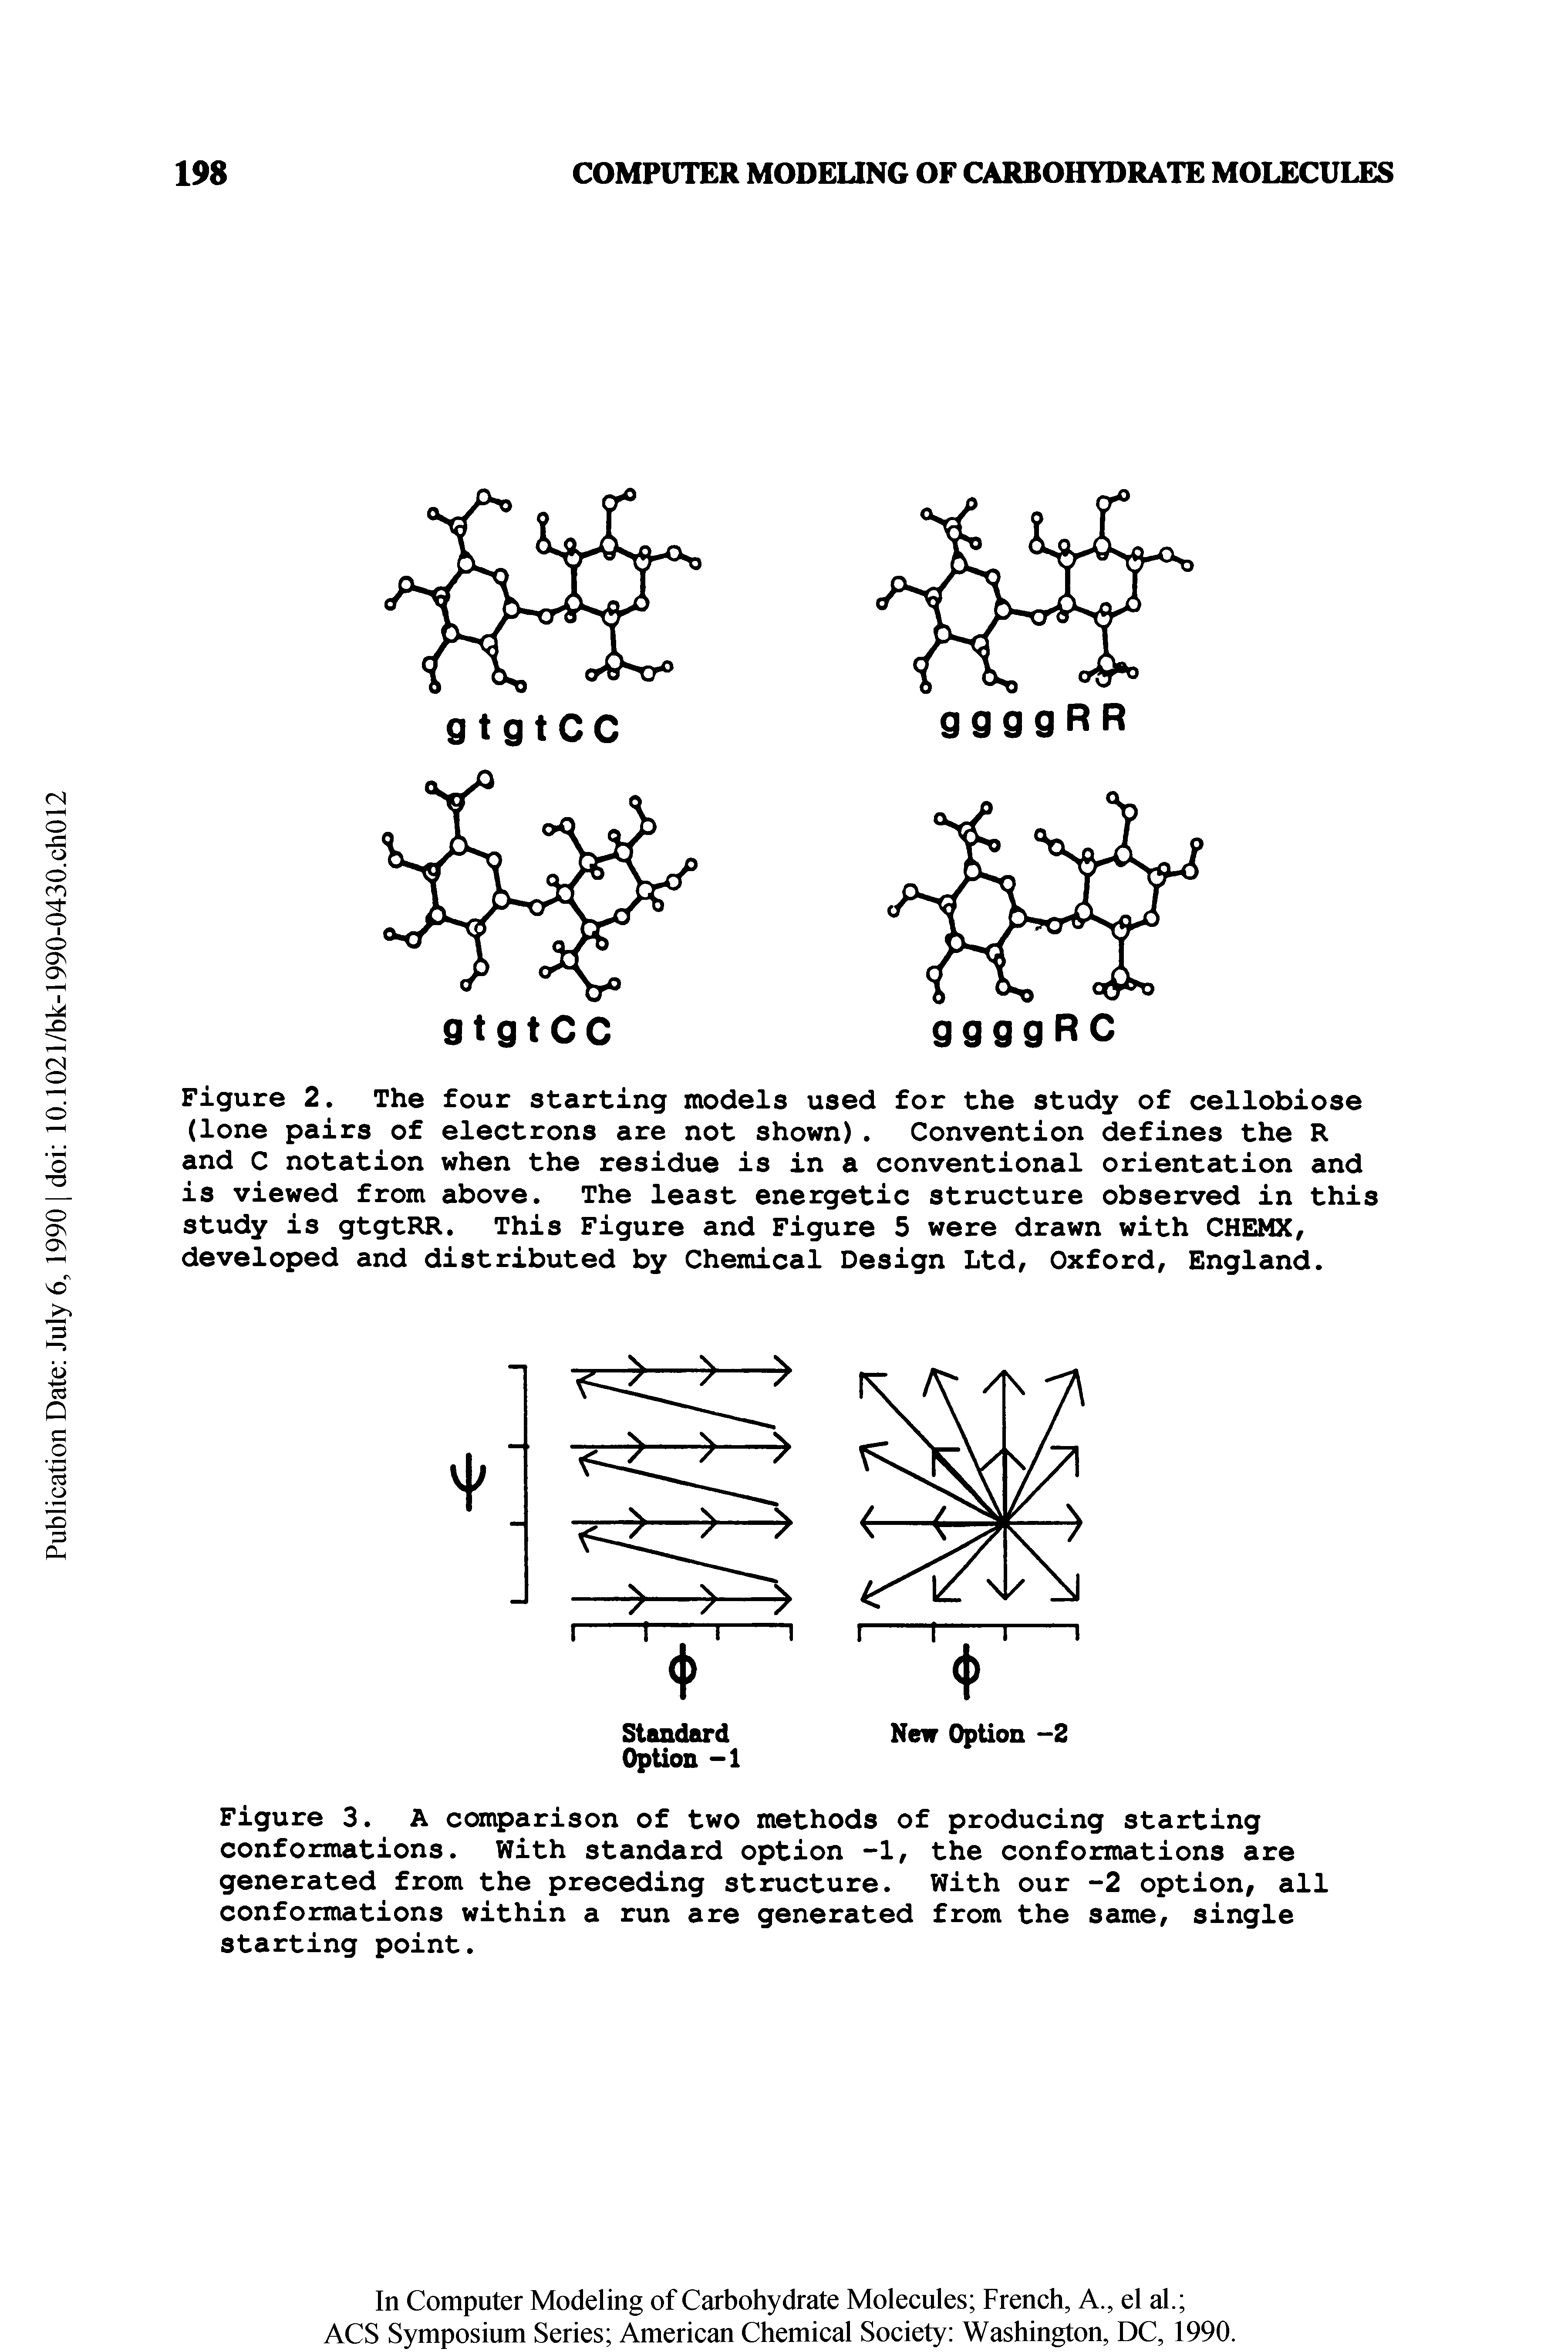 Figure 3. A comparison of two methods of producing starting conformations. With standard option -1, the conformations are generated from the preceding structure. With our -2 option, all conformations within a run are generated from the same, single starting point.